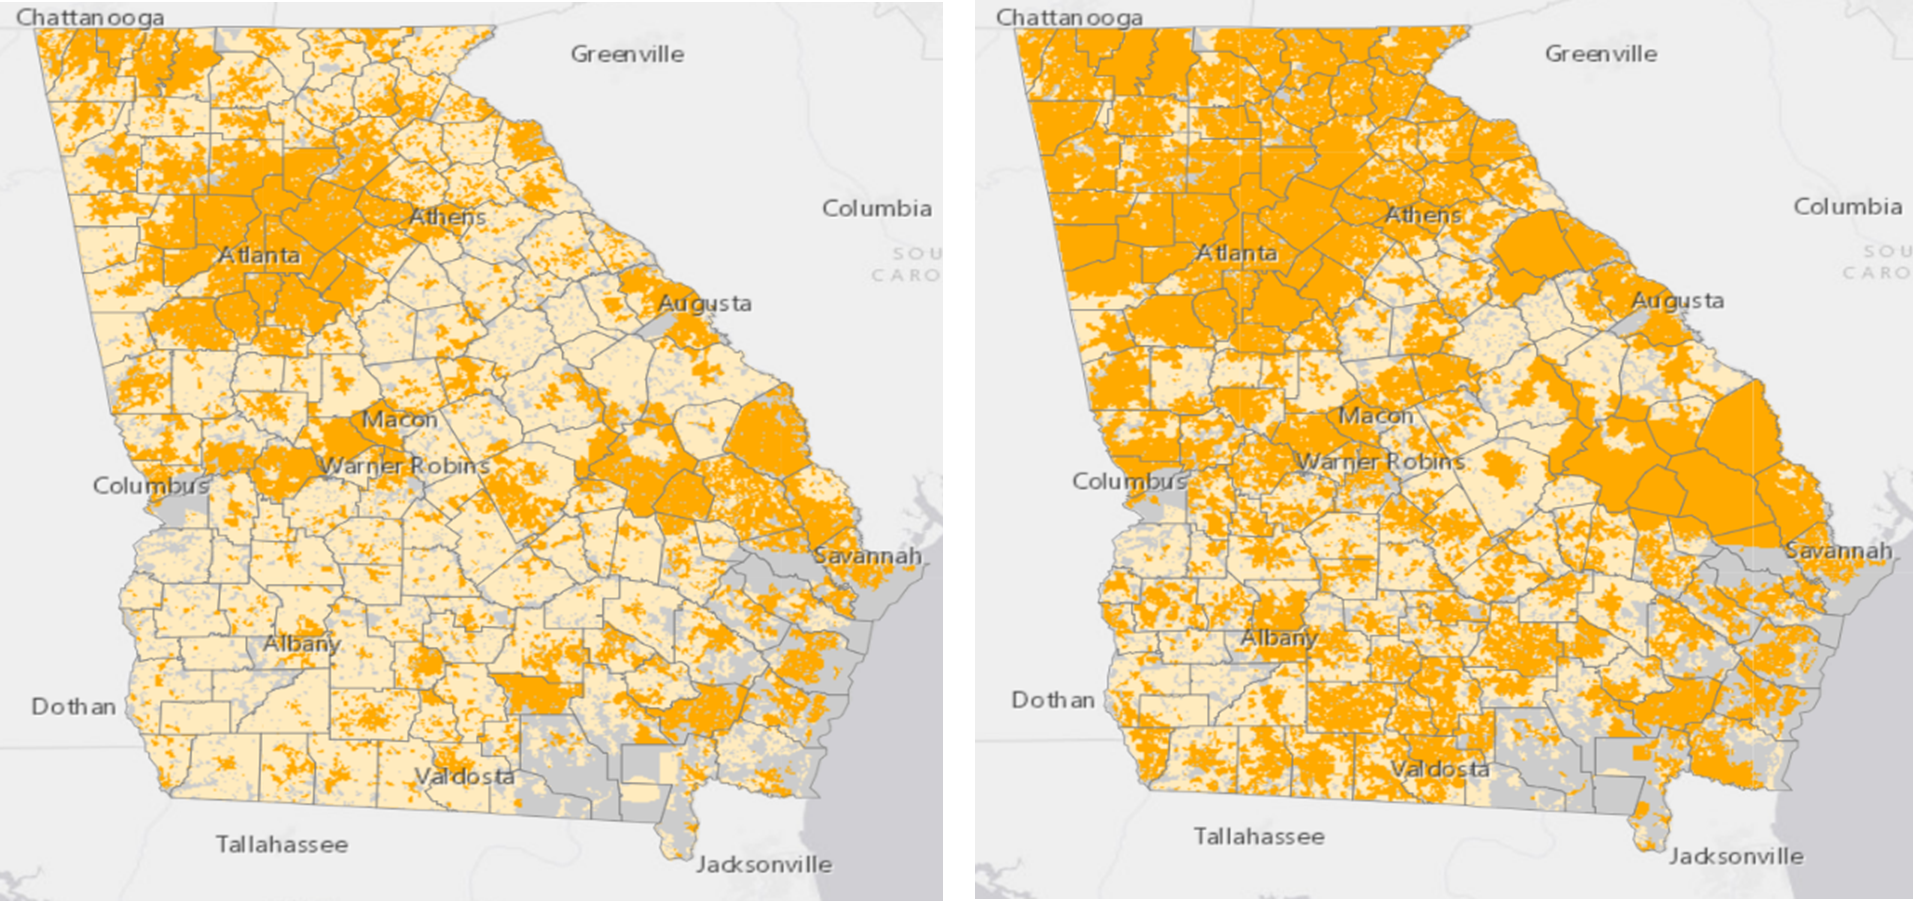 Georgia map on the left, FCC map on the right, “served” locations in the darker color and “unserved” locations in the lighter color.